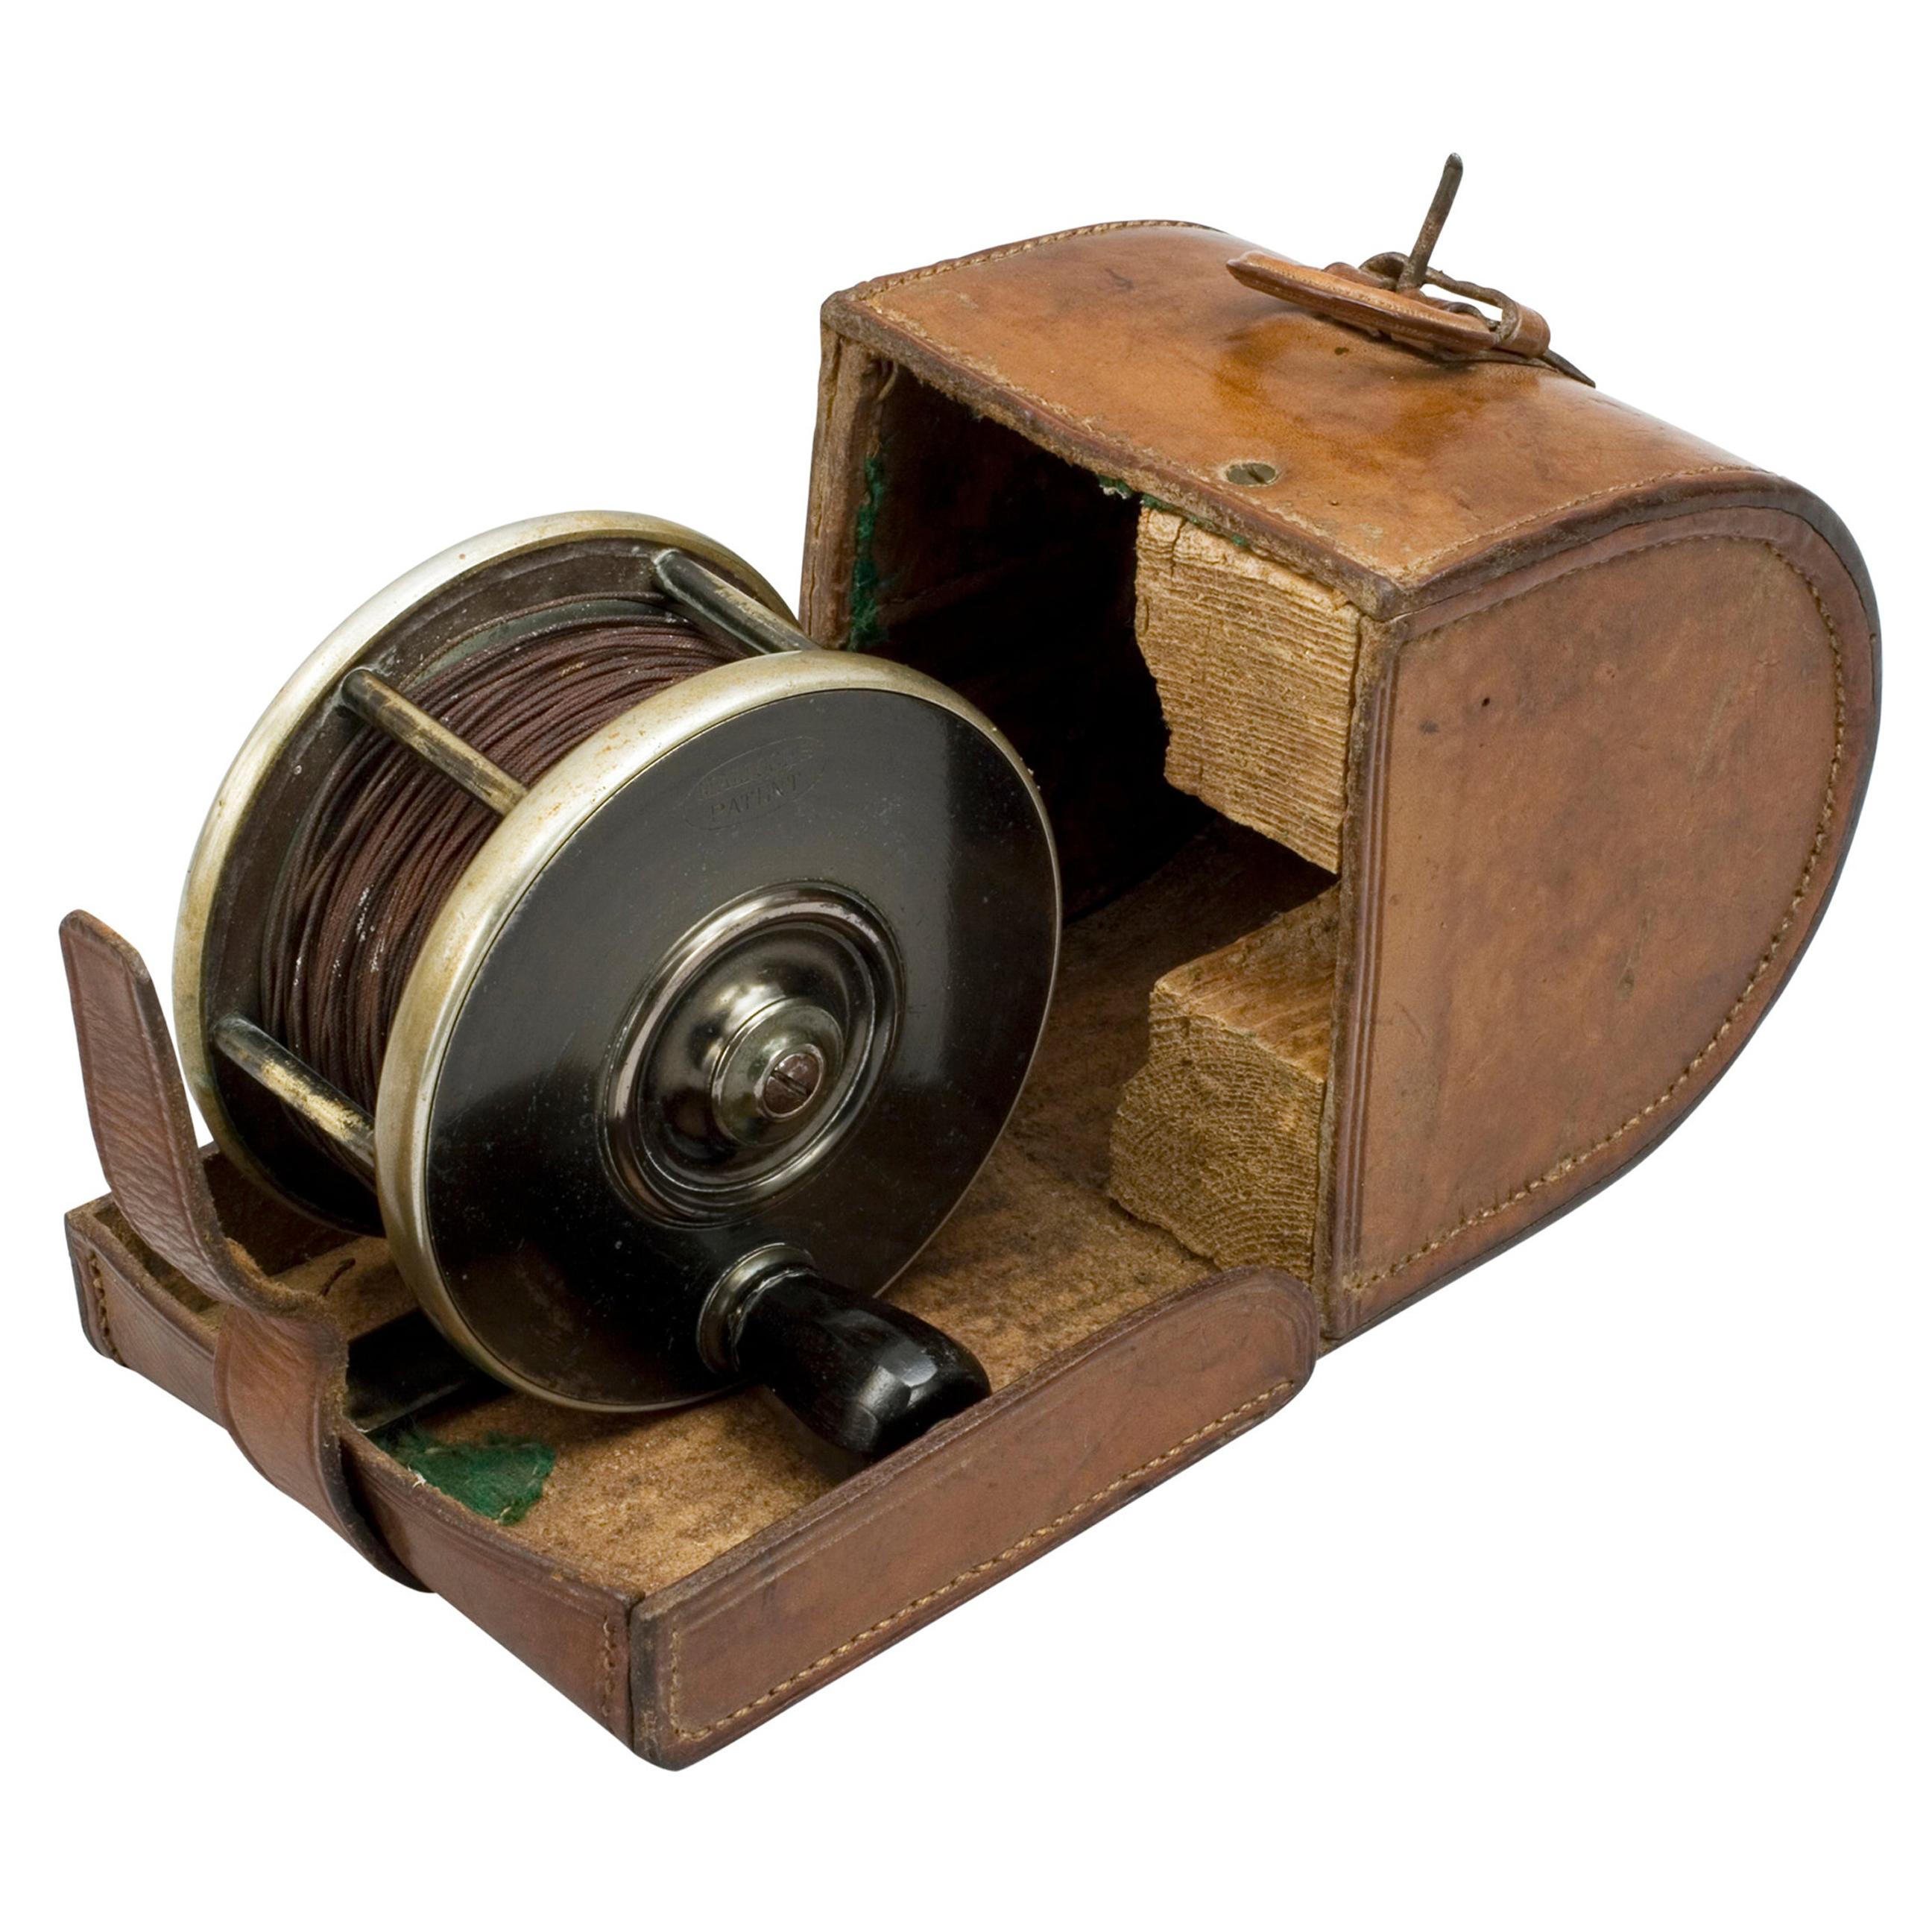 P D Malloch Patented "Sun and Planet" Fishing Reel.